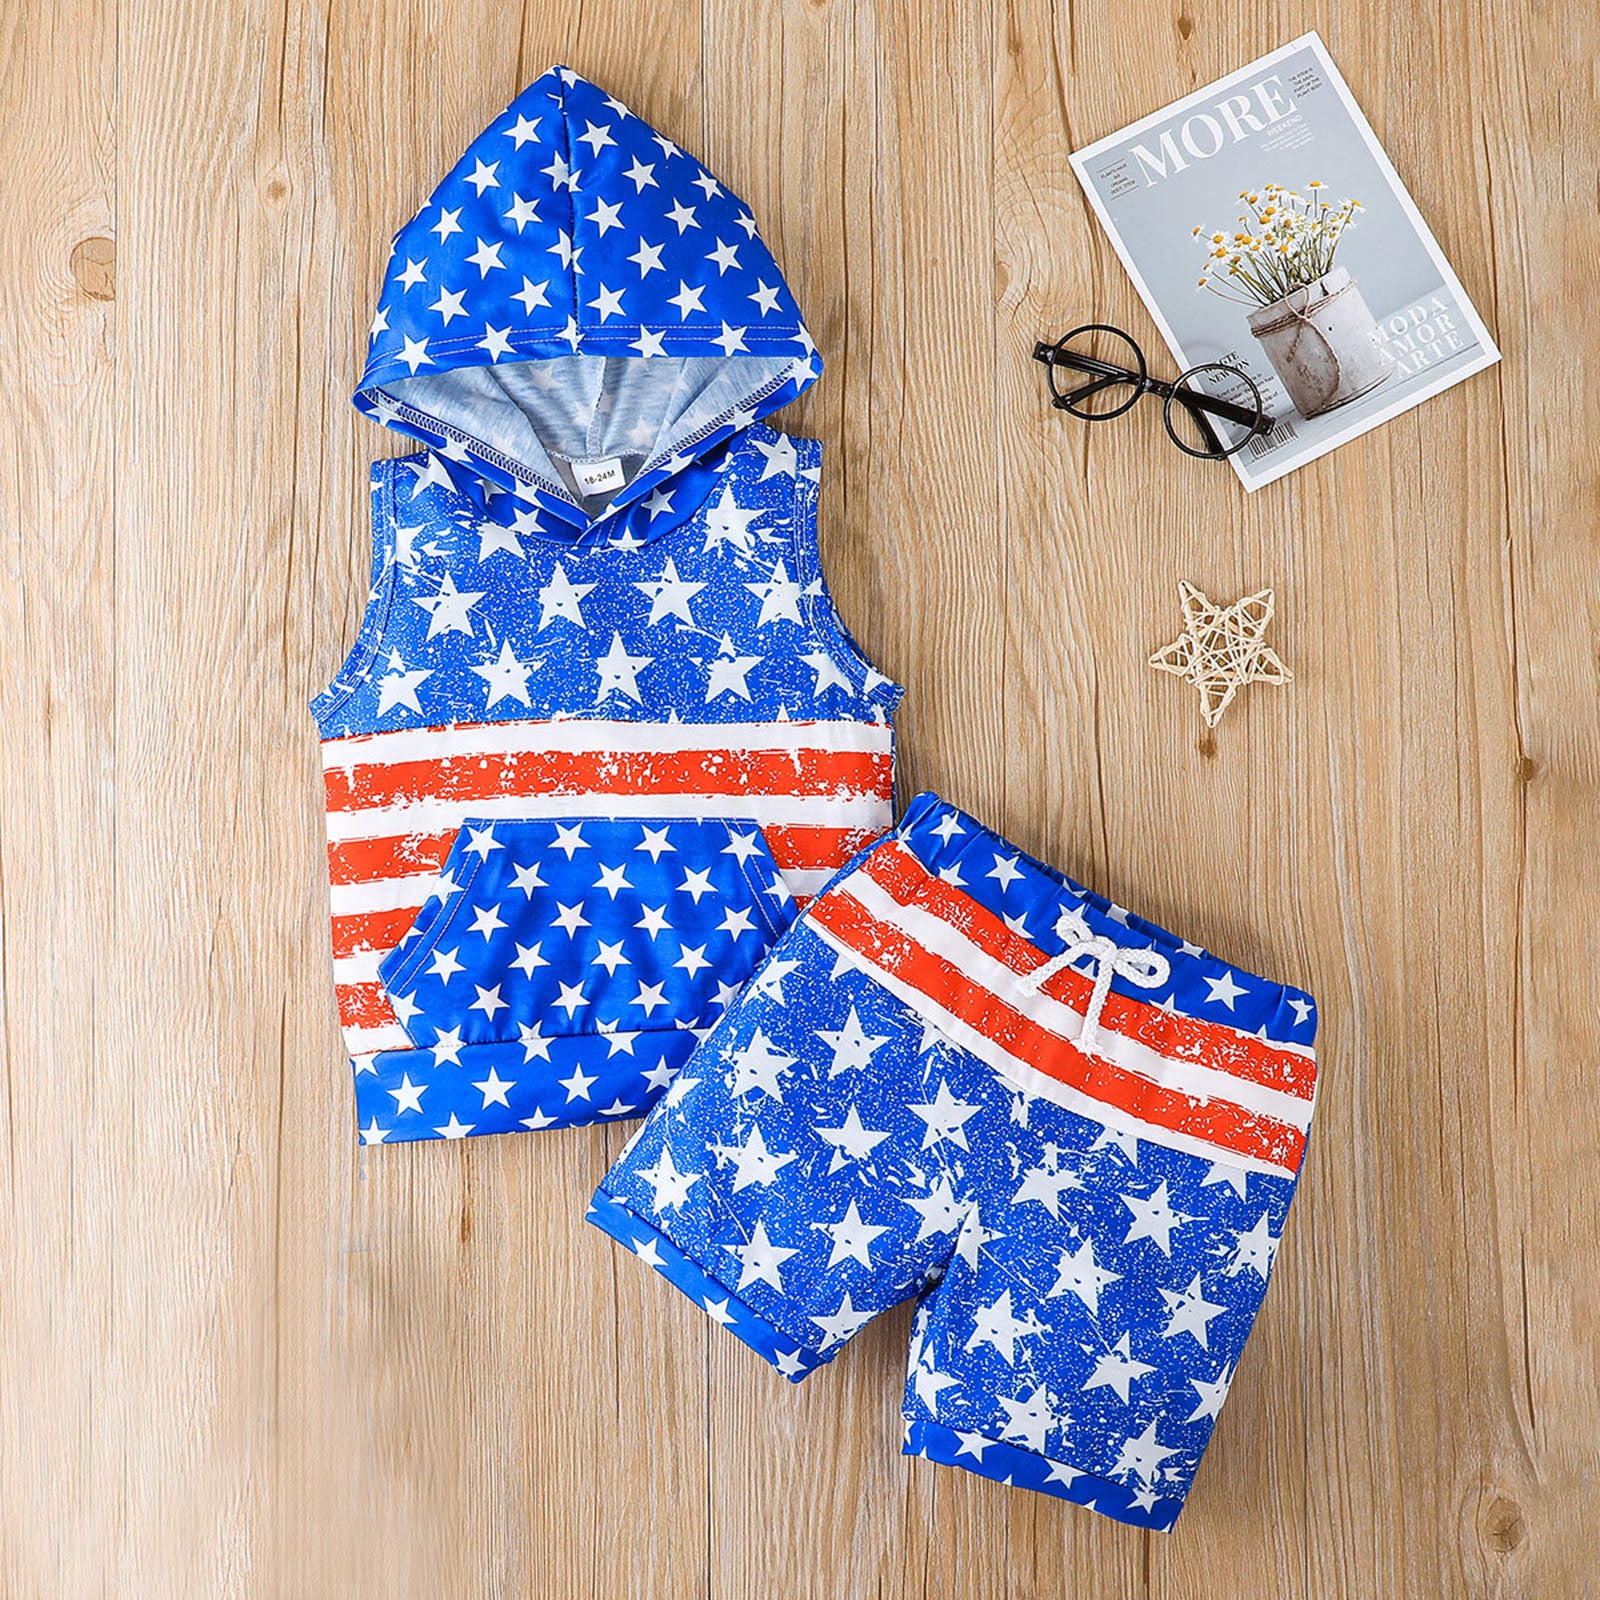 Toddler Boys Independence Day 4th Of July Outfits 2PCS Sleeveless Hooded Tops Shorts Kids - ChildAngle